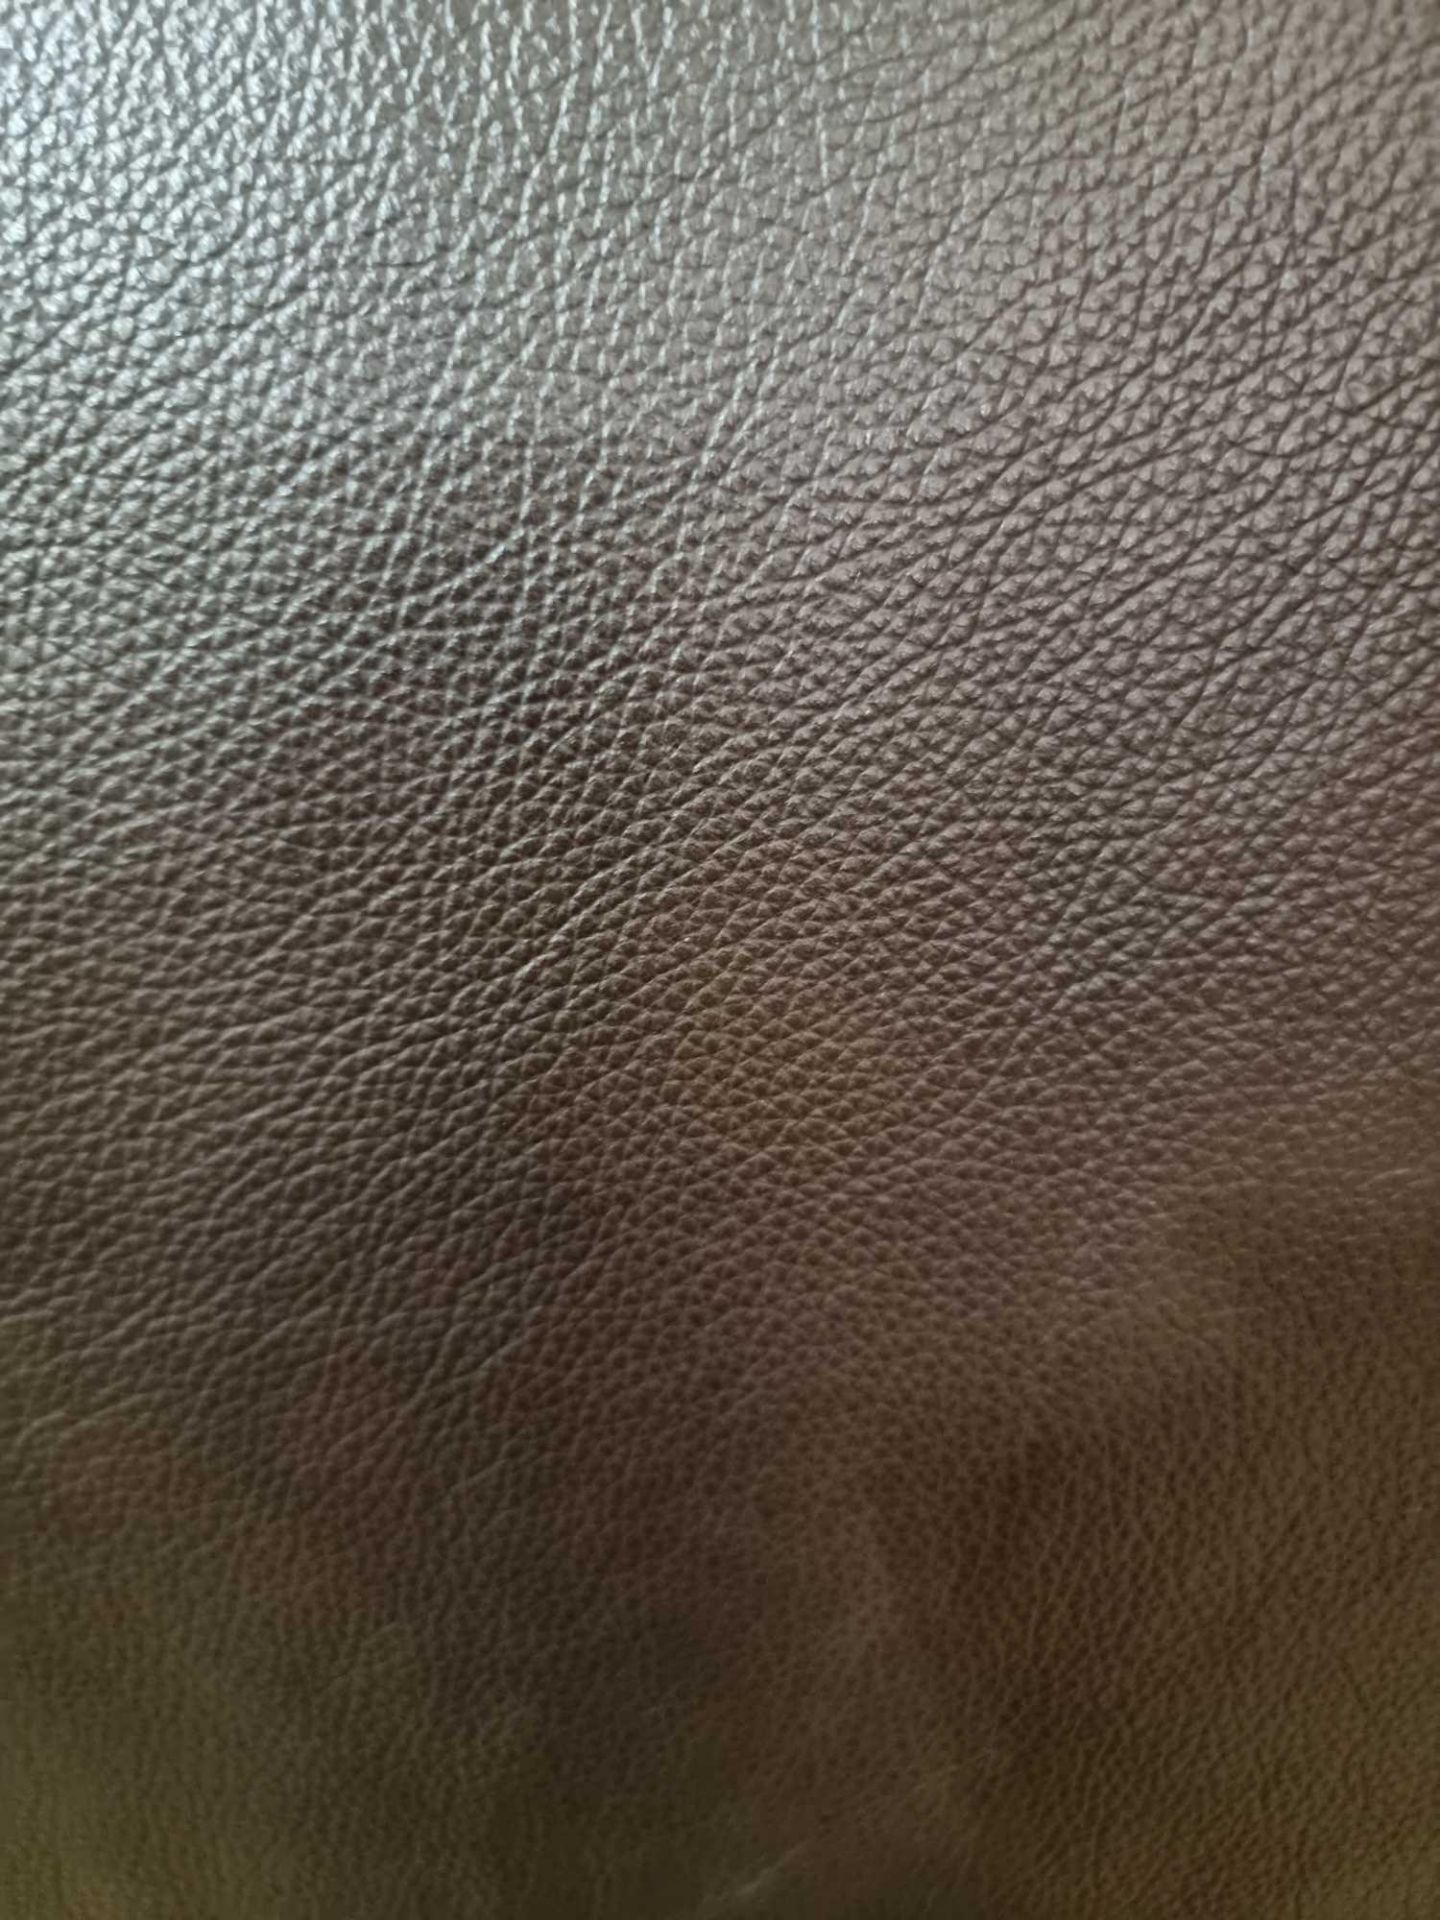 Mastrotto Hudson Chocolate Leather Hide approximately 3.24mÂ² 1.8 x 1.8cm